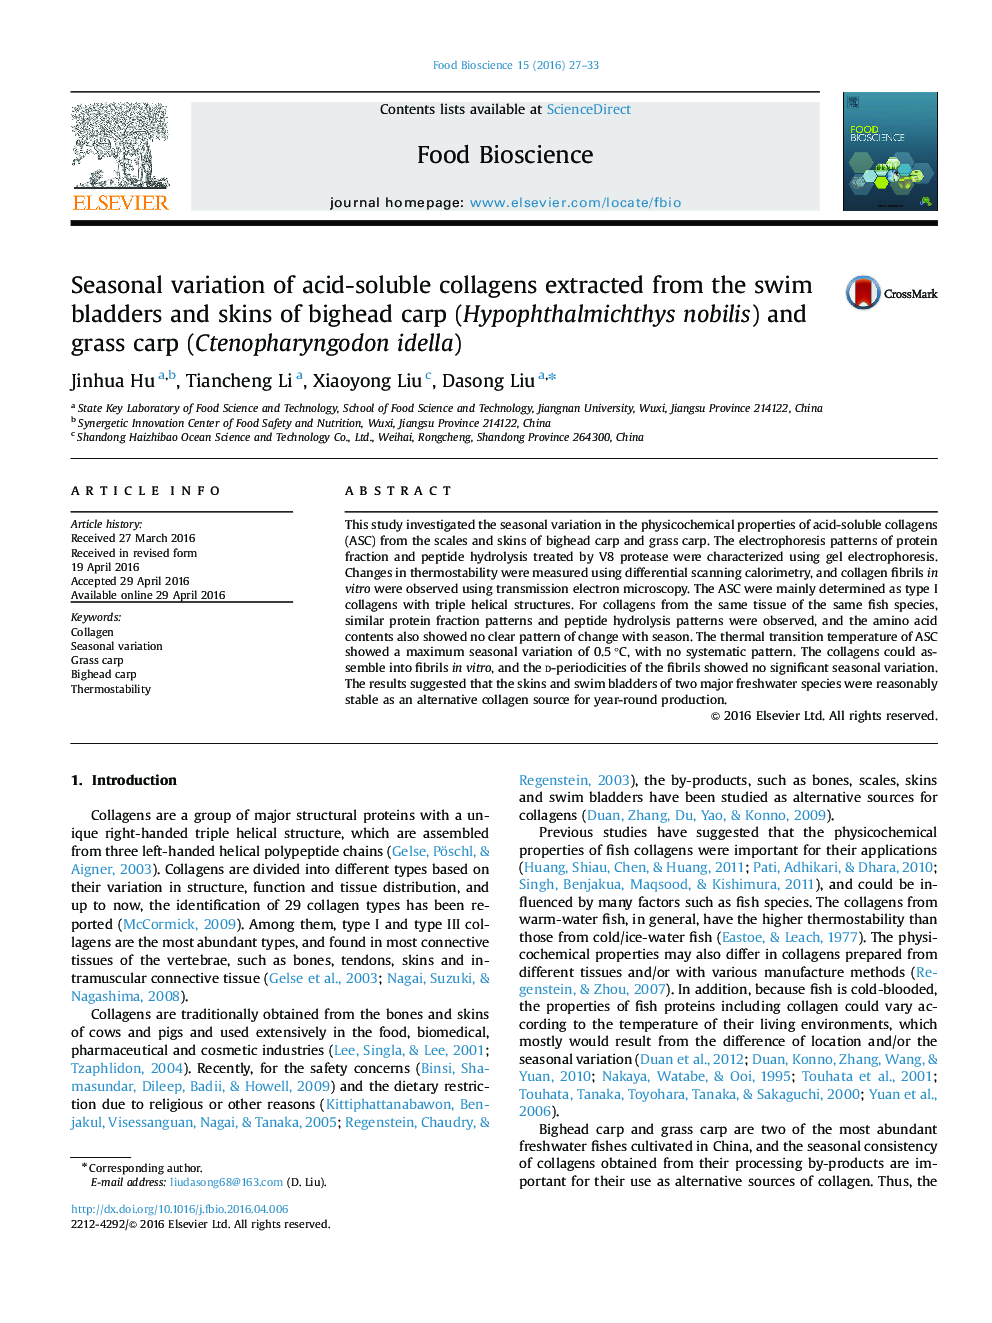 Seasonal variation of acid-soluble collagens extracted from the swim bladders and skins of bighead carp (Hypophthalmichthys nobilis) and grass carp (Ctenopharyngodon idella)